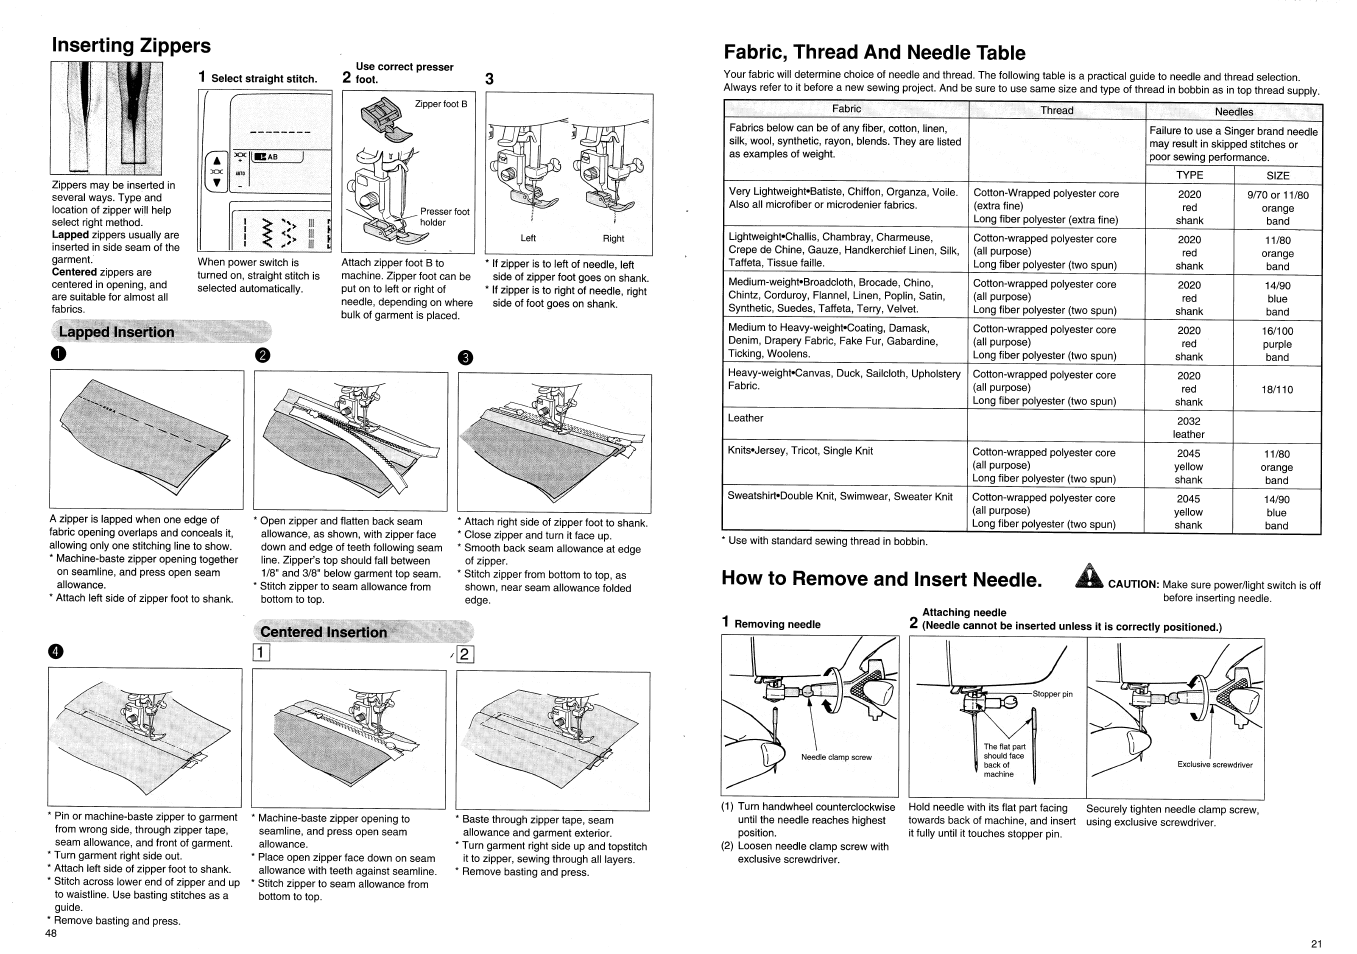 Fabric, thread and needle table, How to remove and insert needle | SINGER XL100 Quantum User Manual | Page 23 / 72